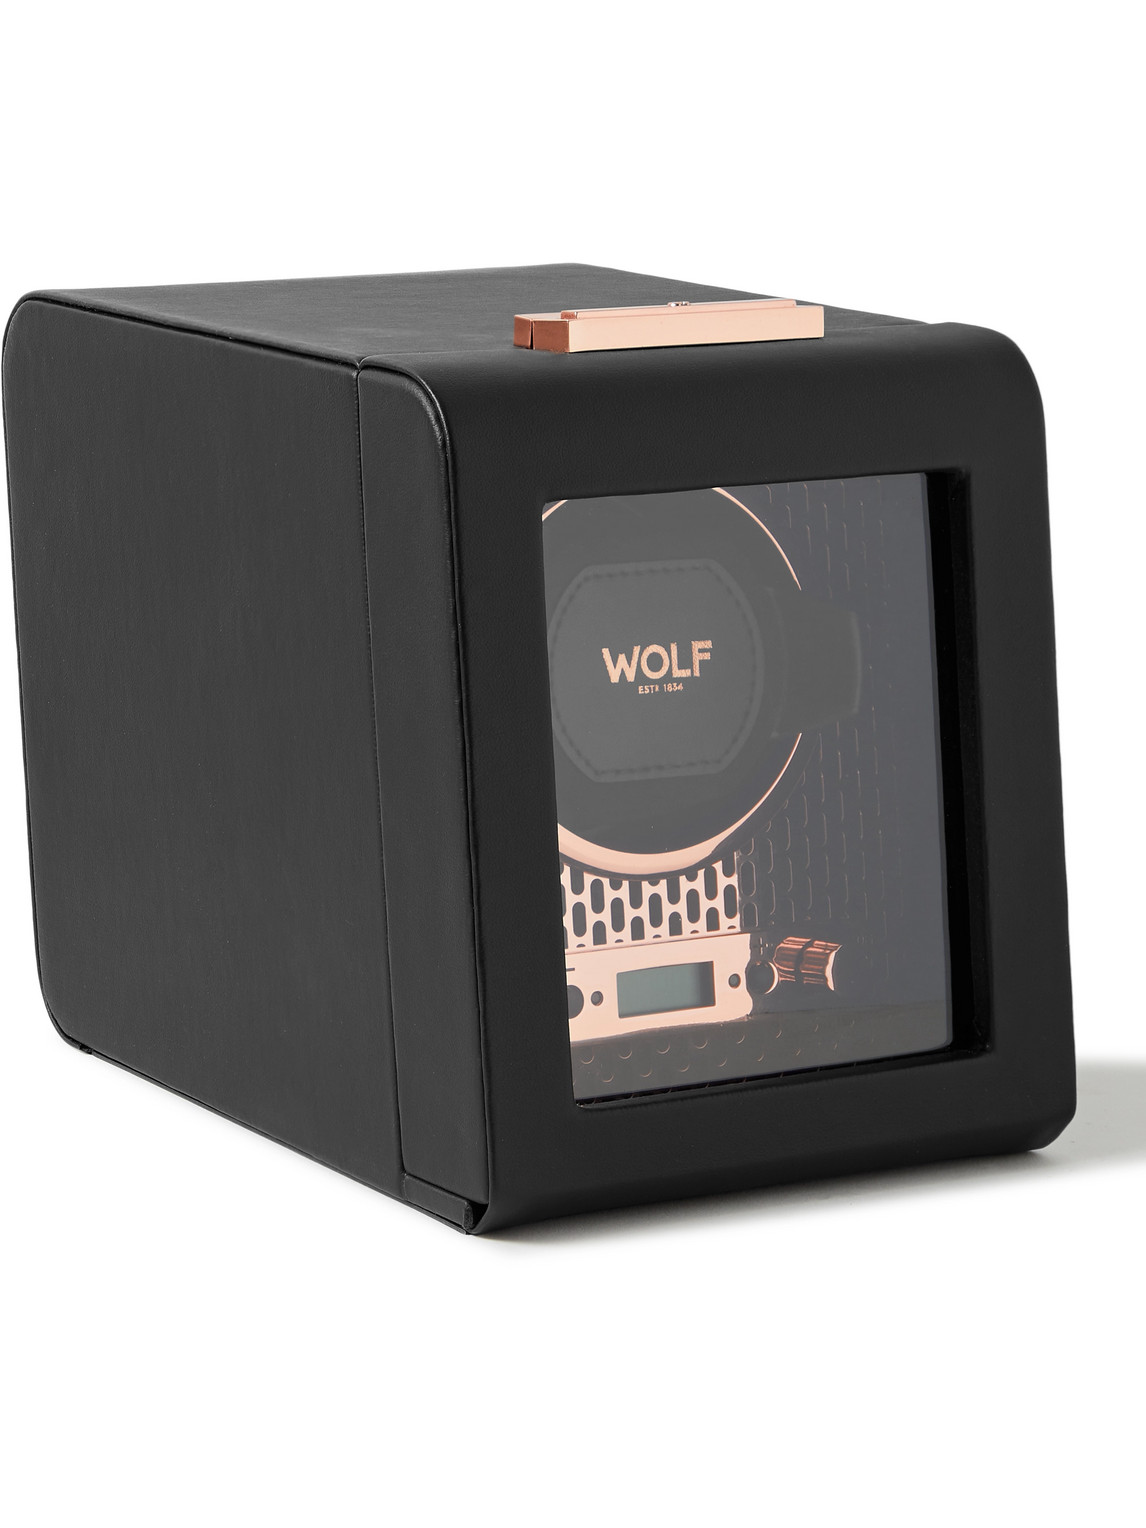 WOLF AXIS VEGAN LEATHER SINGLE WATCH WINDER